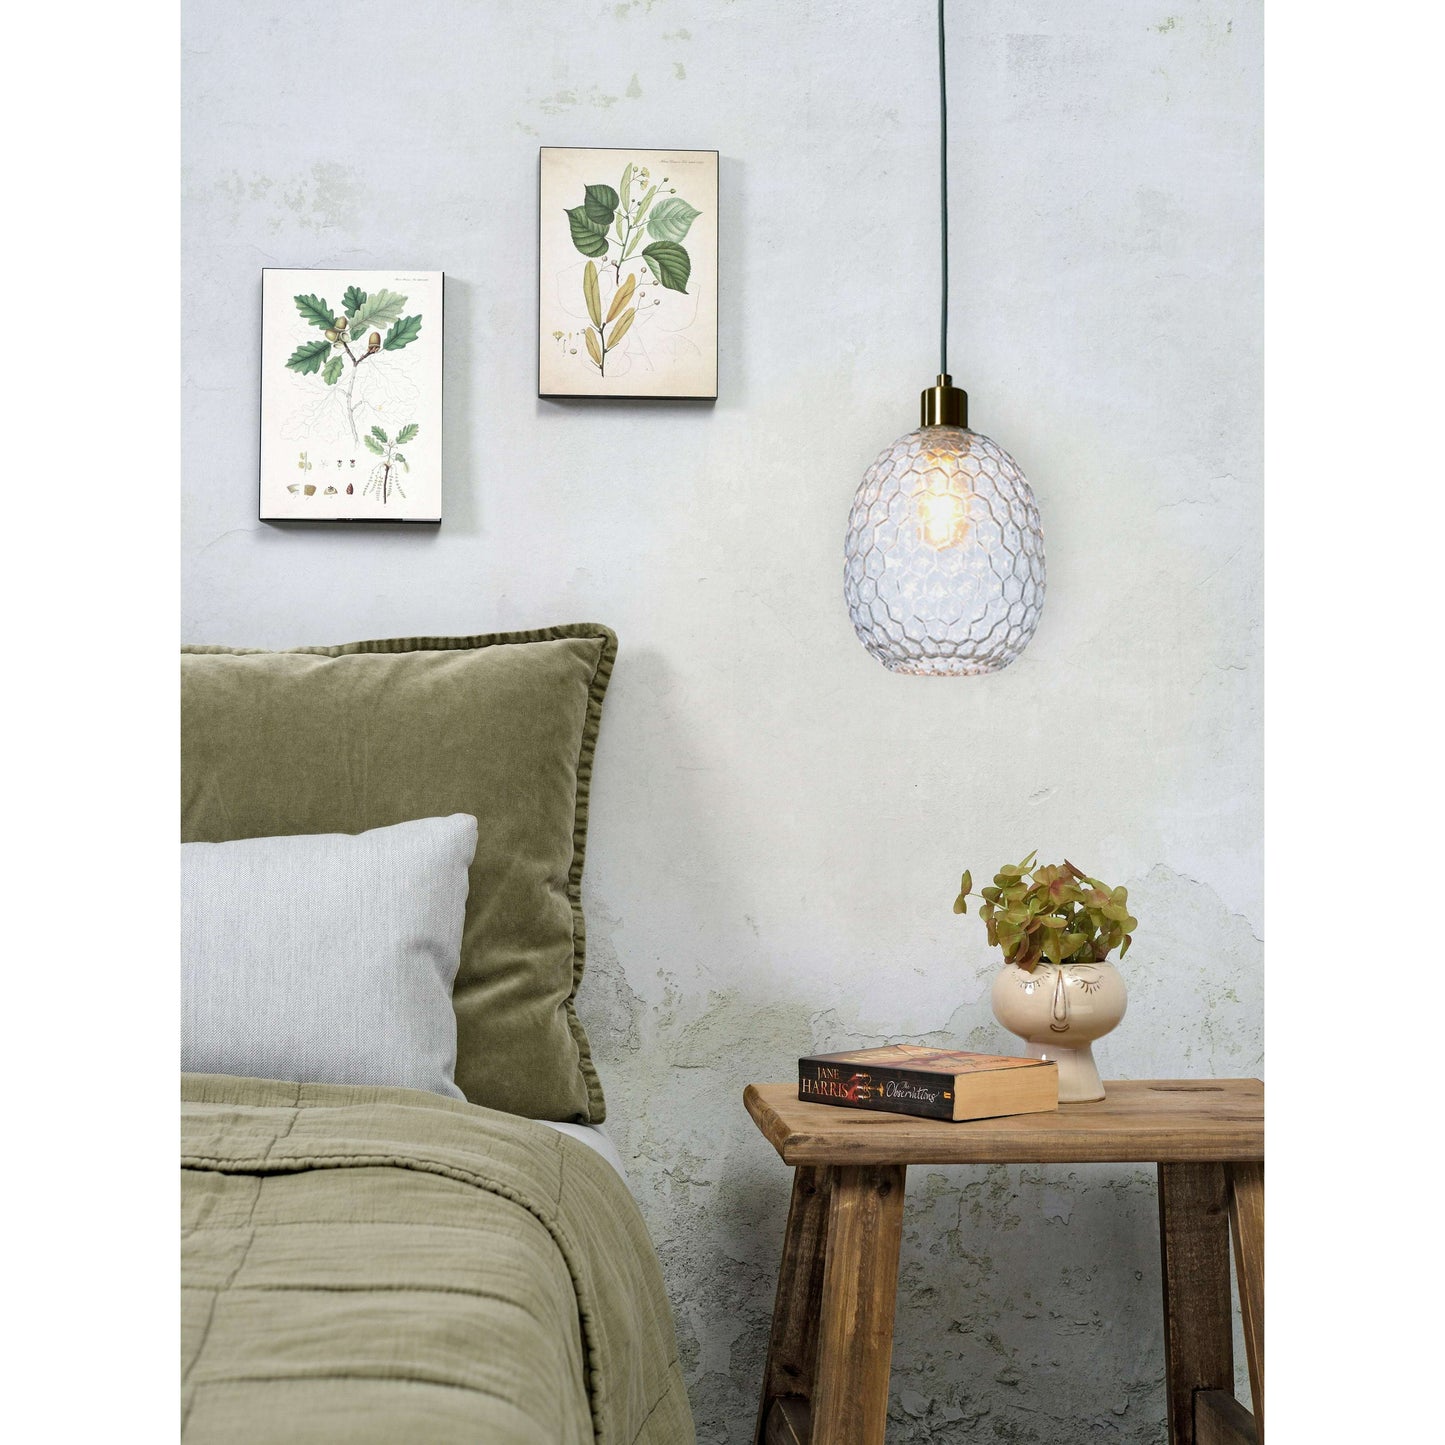 it's about RoMi Venice hanglamp ovaal transparant